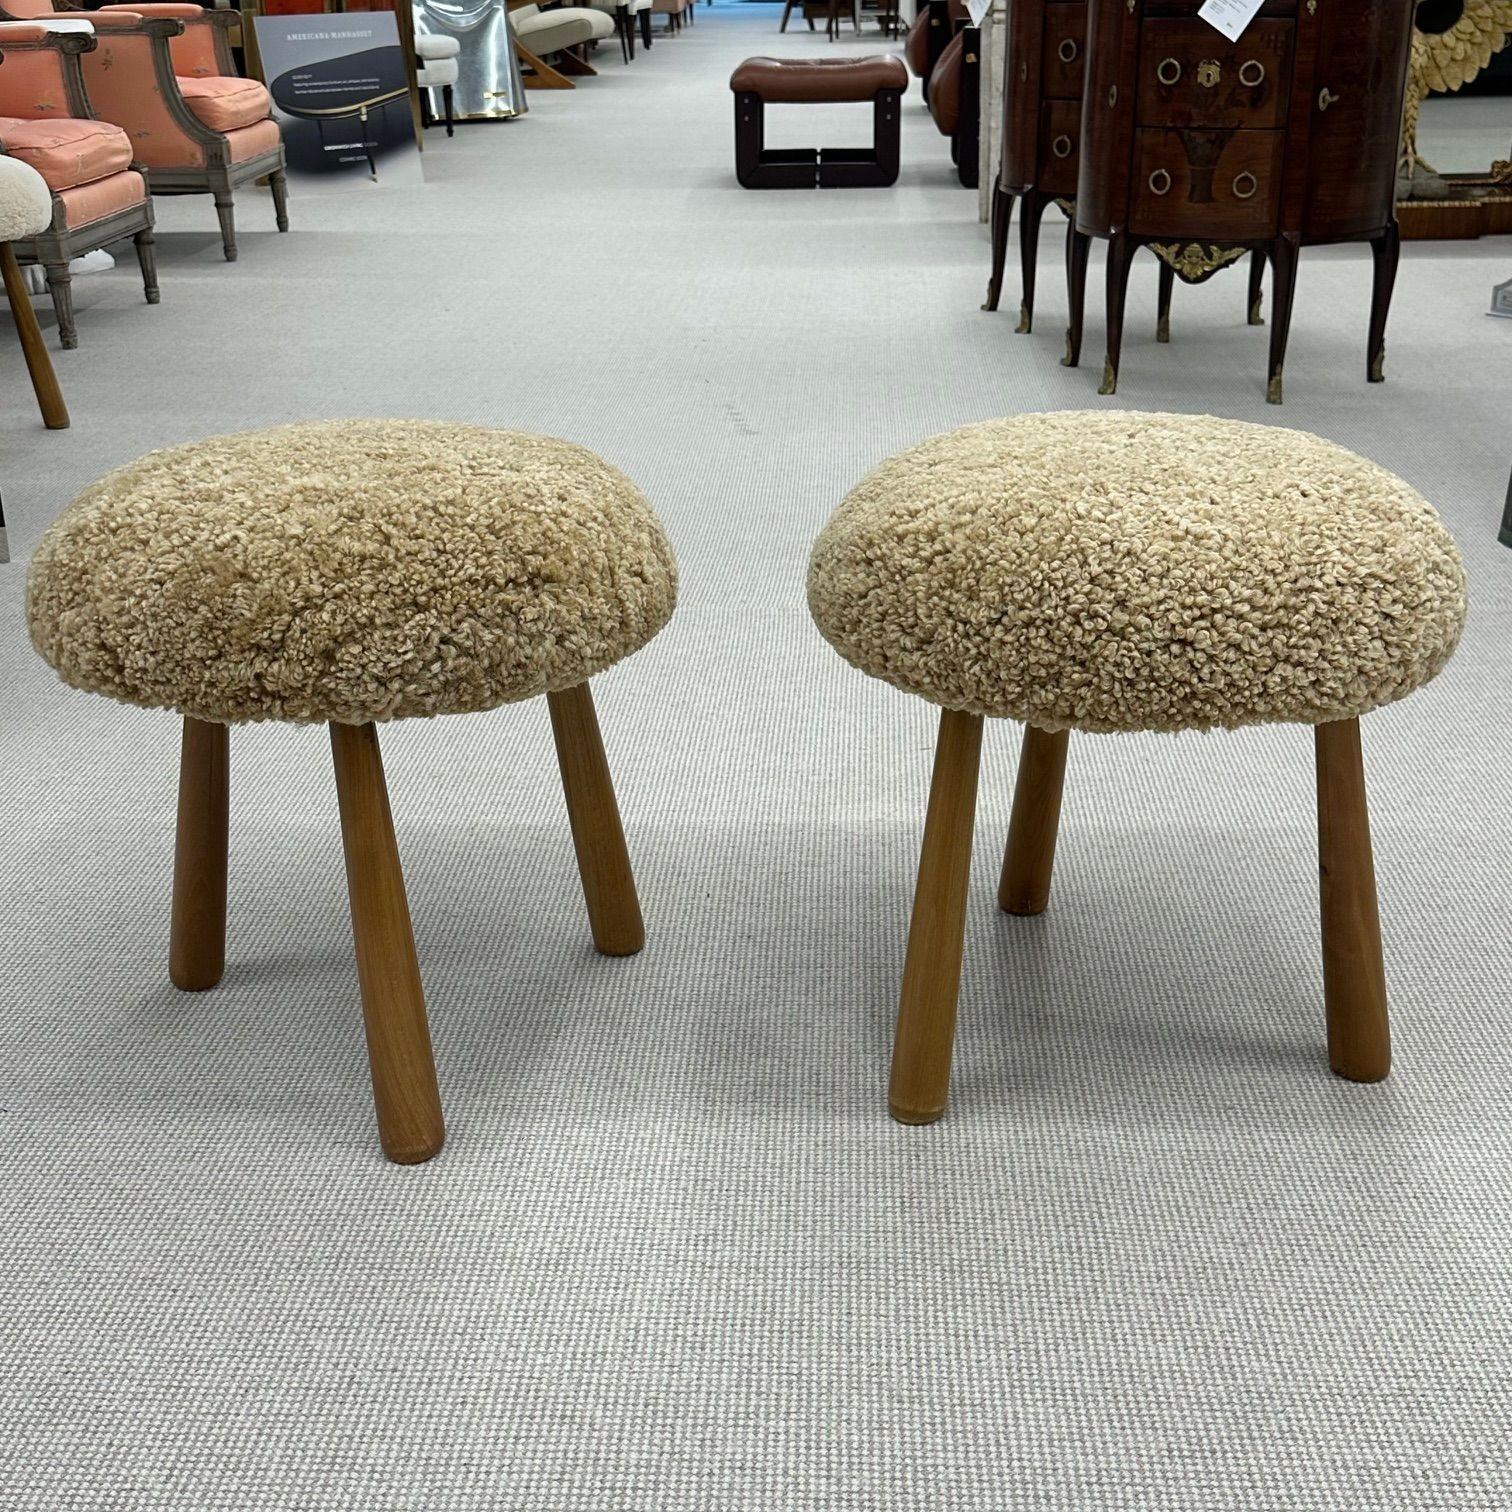 Two Contemporary Sheepskin Foot stools, Ottomans, Swedish Modern, Shearling
Contemporary organic form tri-pod footstools or ottomans. New, comfortable foam cushioning and 17 mm high quality Australian curly sheepskin. Overall form and design